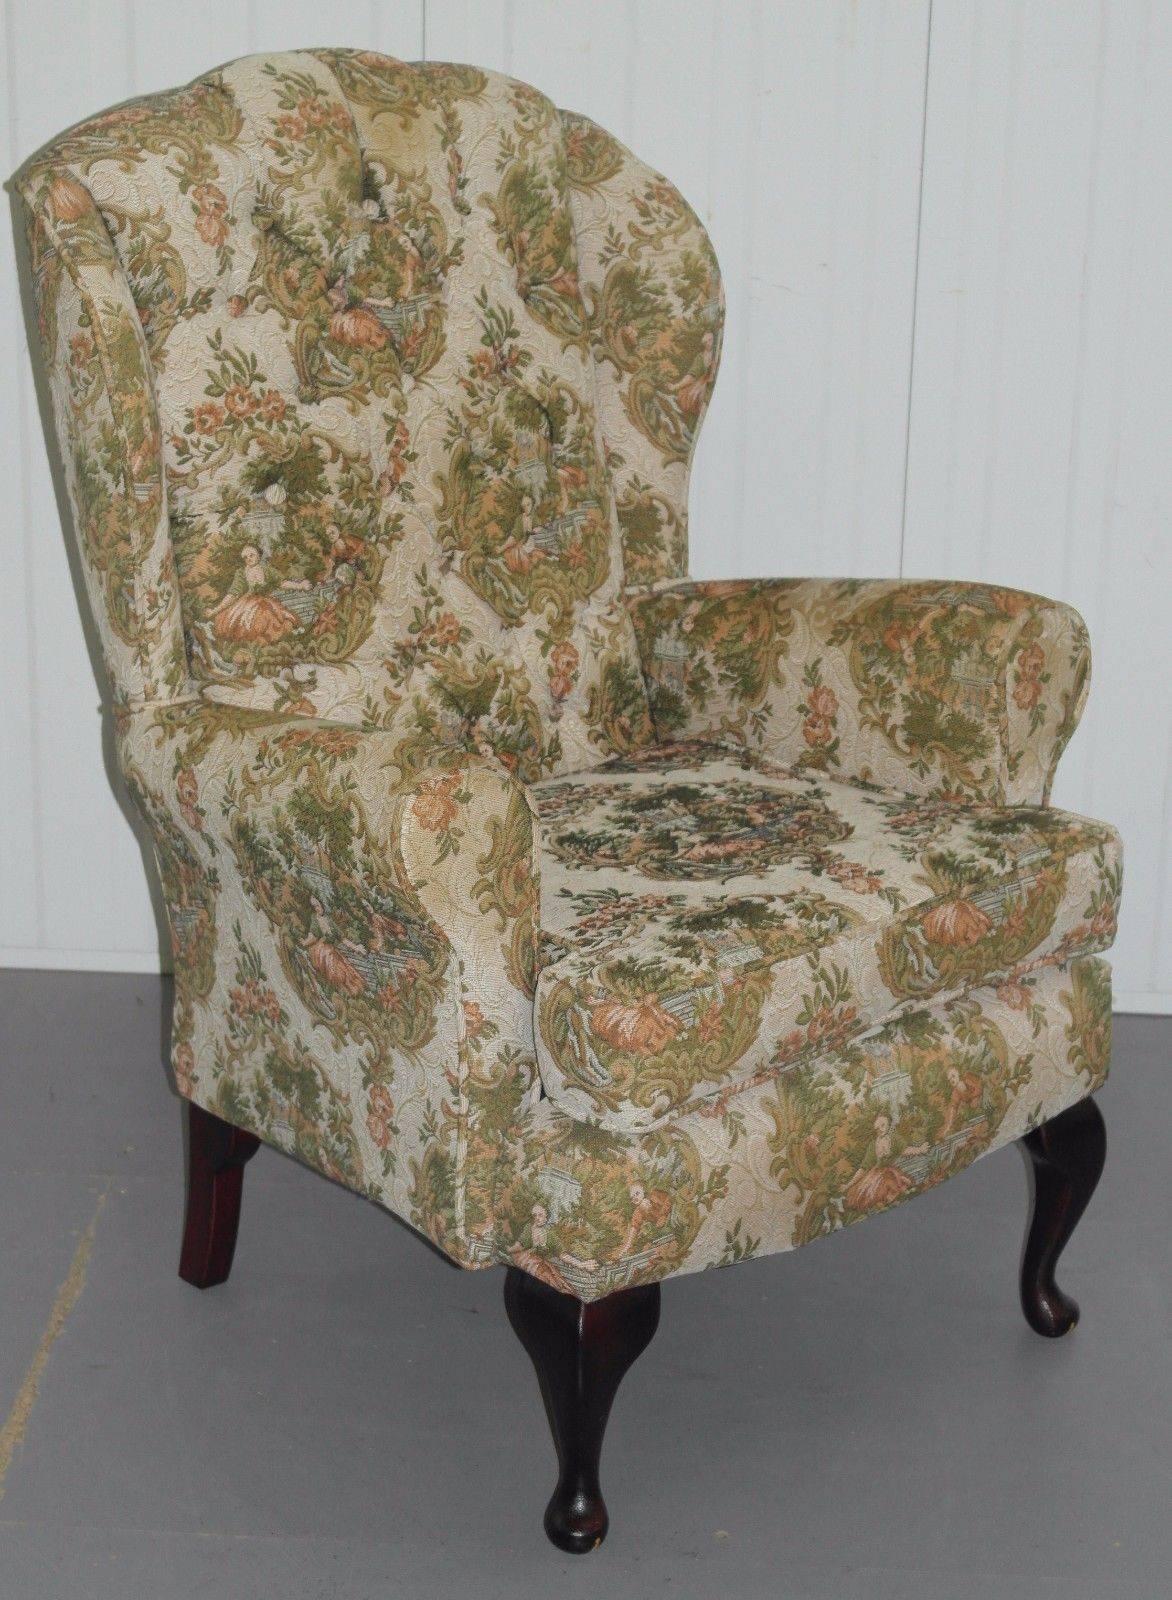 We are delighted to offer for sale this stunning pair of lovely needlework upholstery Chesterfield wingback Queen Anne armchairs

A lovely pair, one has hardly ever been used, the other a little more, the needlework is all done by hand and matches